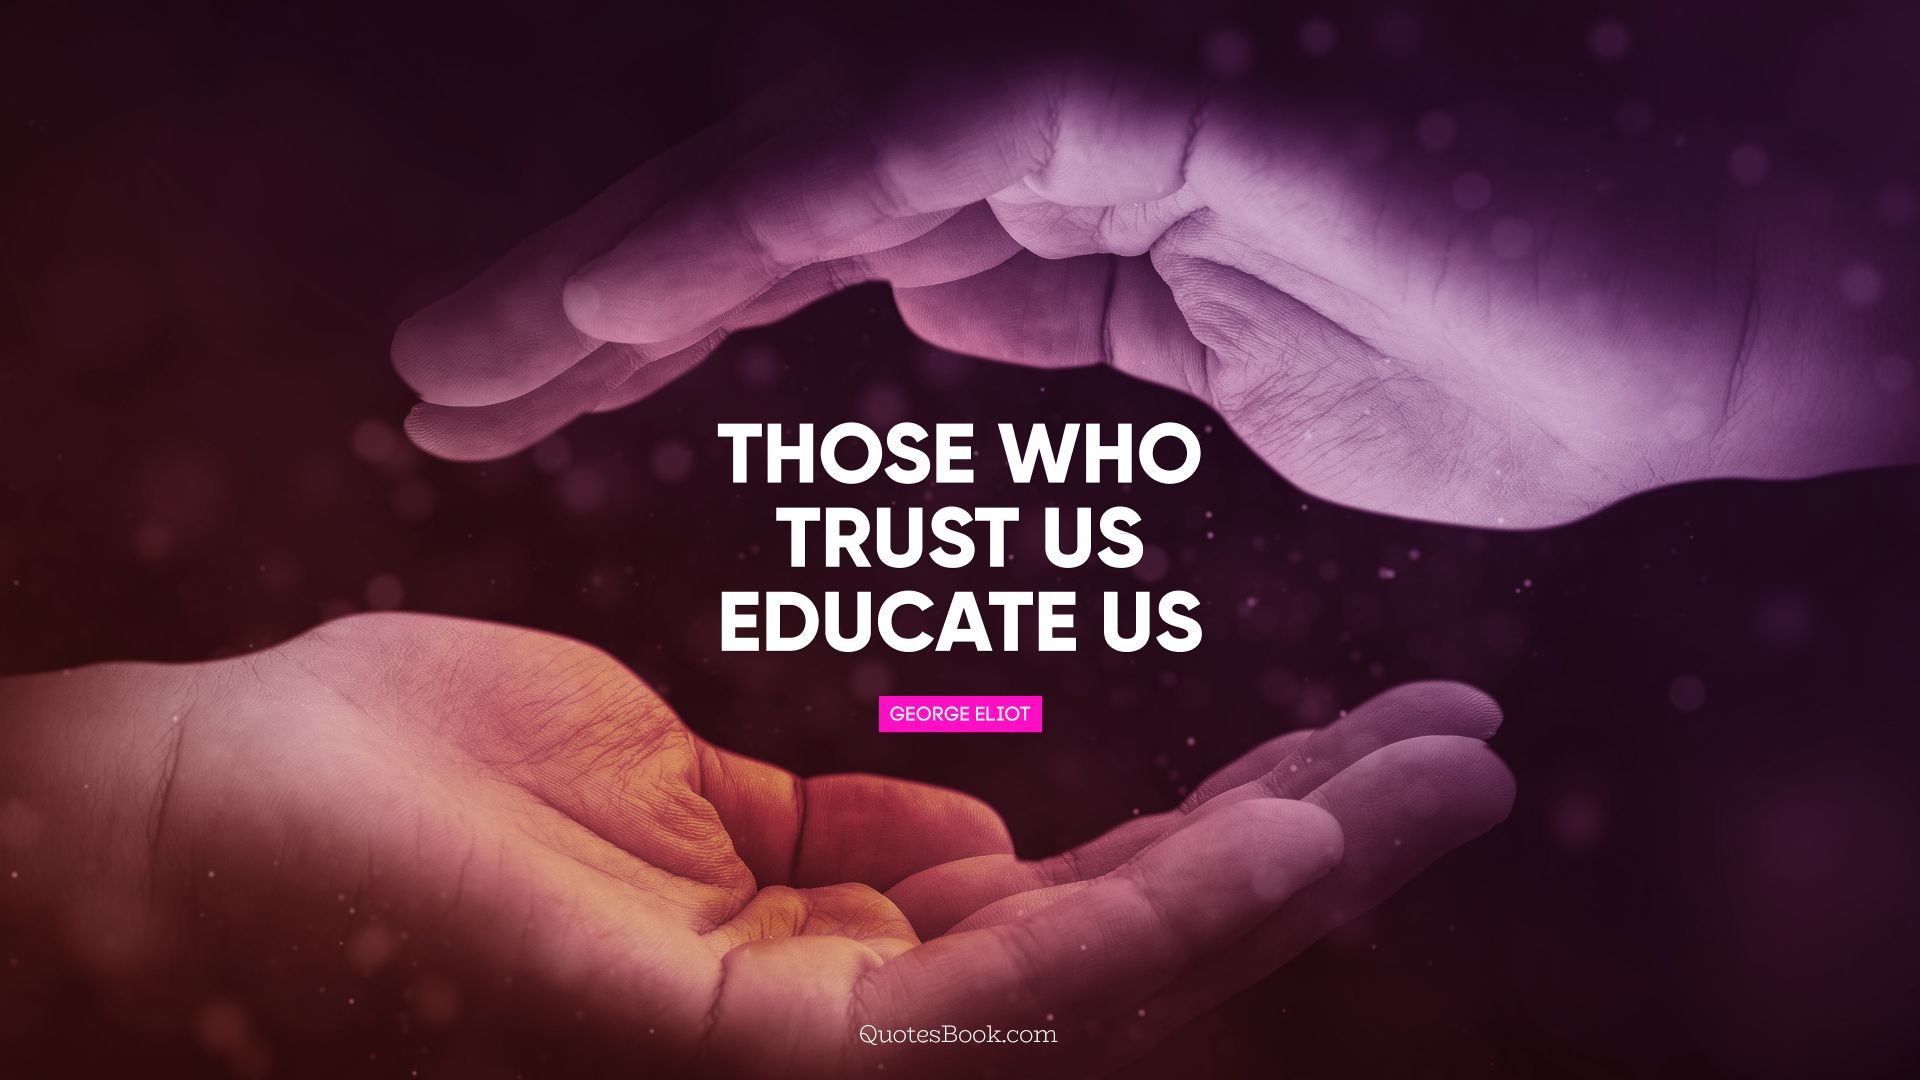 Those who trust us educate us. - Quote by George Eliot